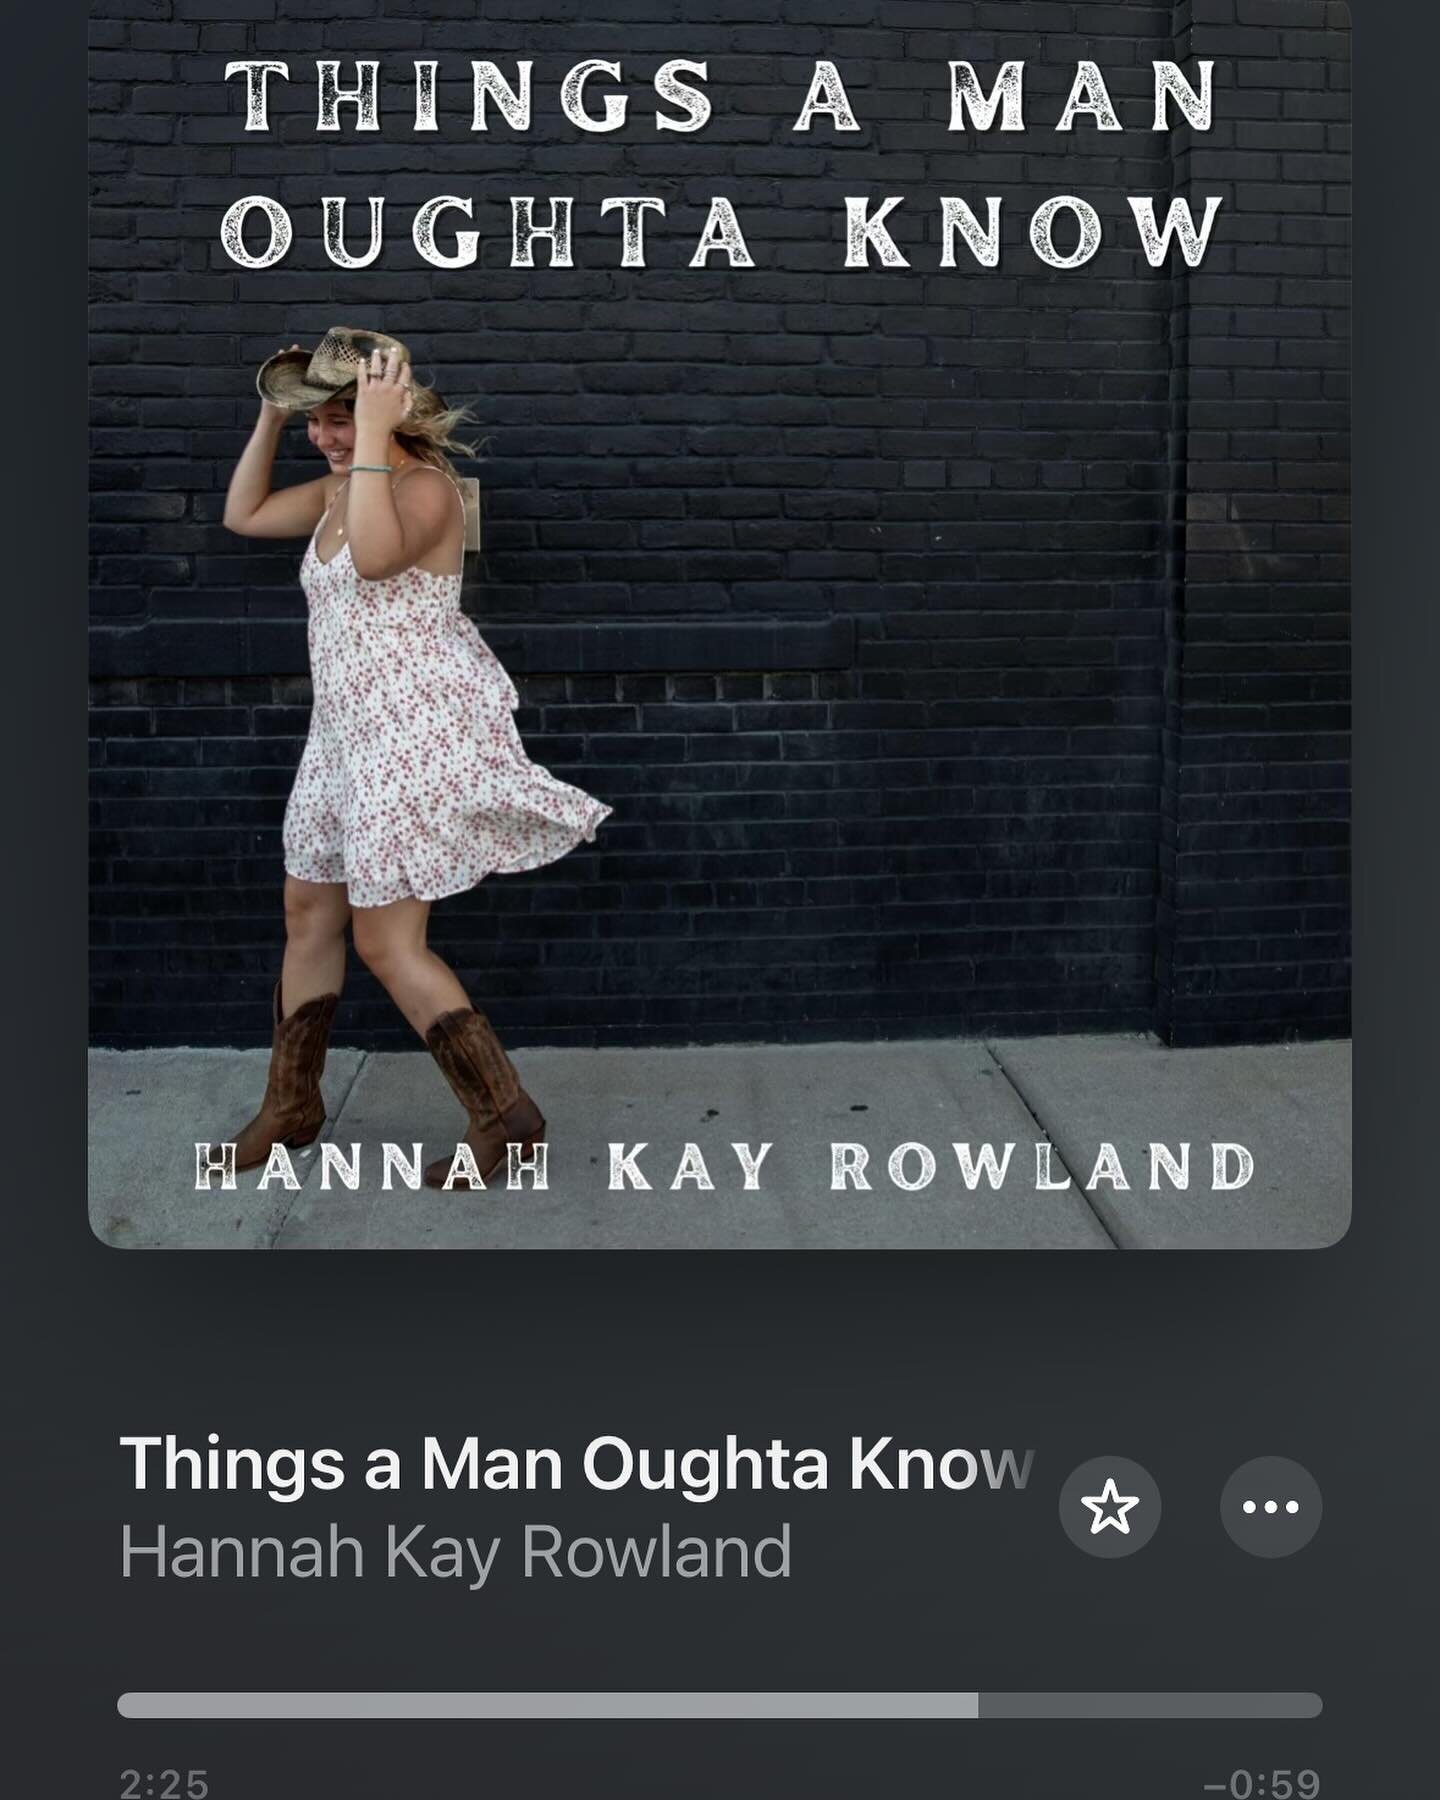 Things a Man Oughta Know is out now on all streaming platforms!!! Go check it out🤍 #HKR #thingsamanoughtaknow #release